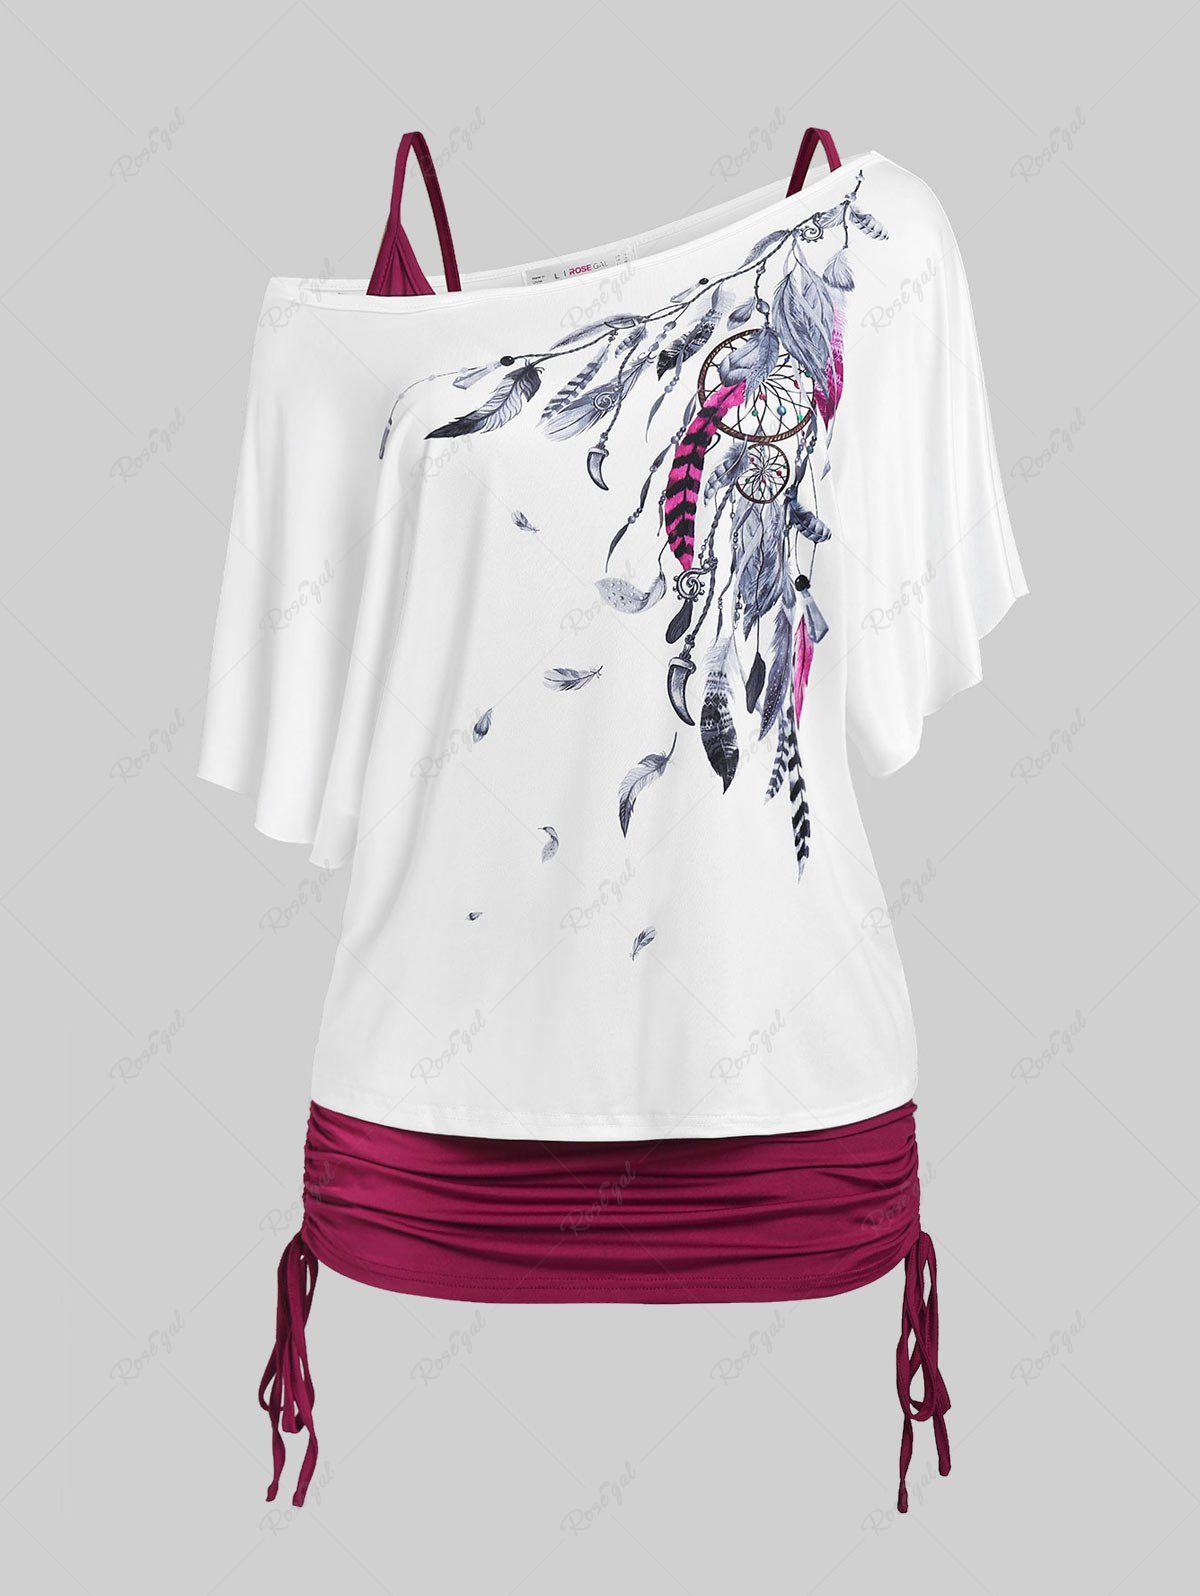 Fancy Plus Size Batwing Sleeve Dreamcatcher Print Skew Neck Tee and Cinched Tank Top Set  